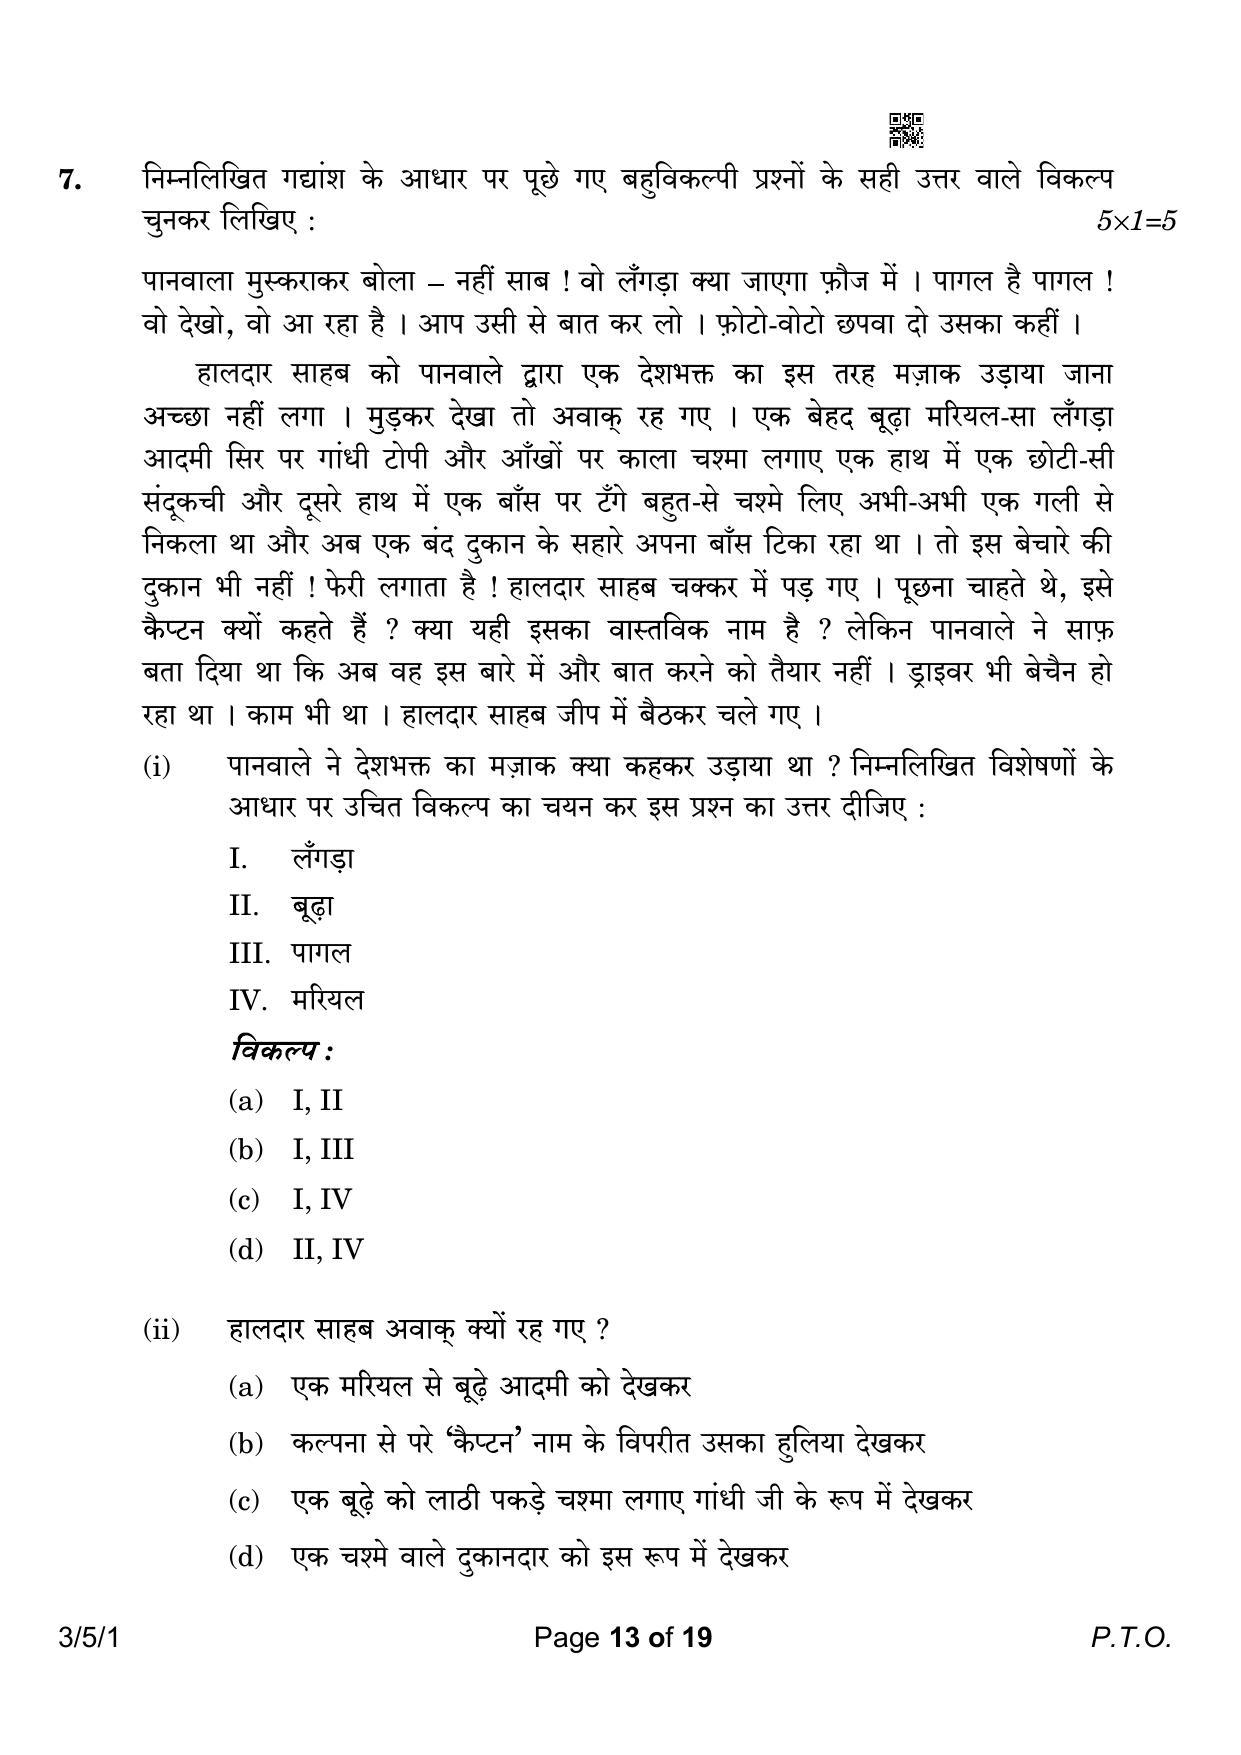 CBSE Class 10 3-5-1 Hindi A 2023 Question Paper - Page 13